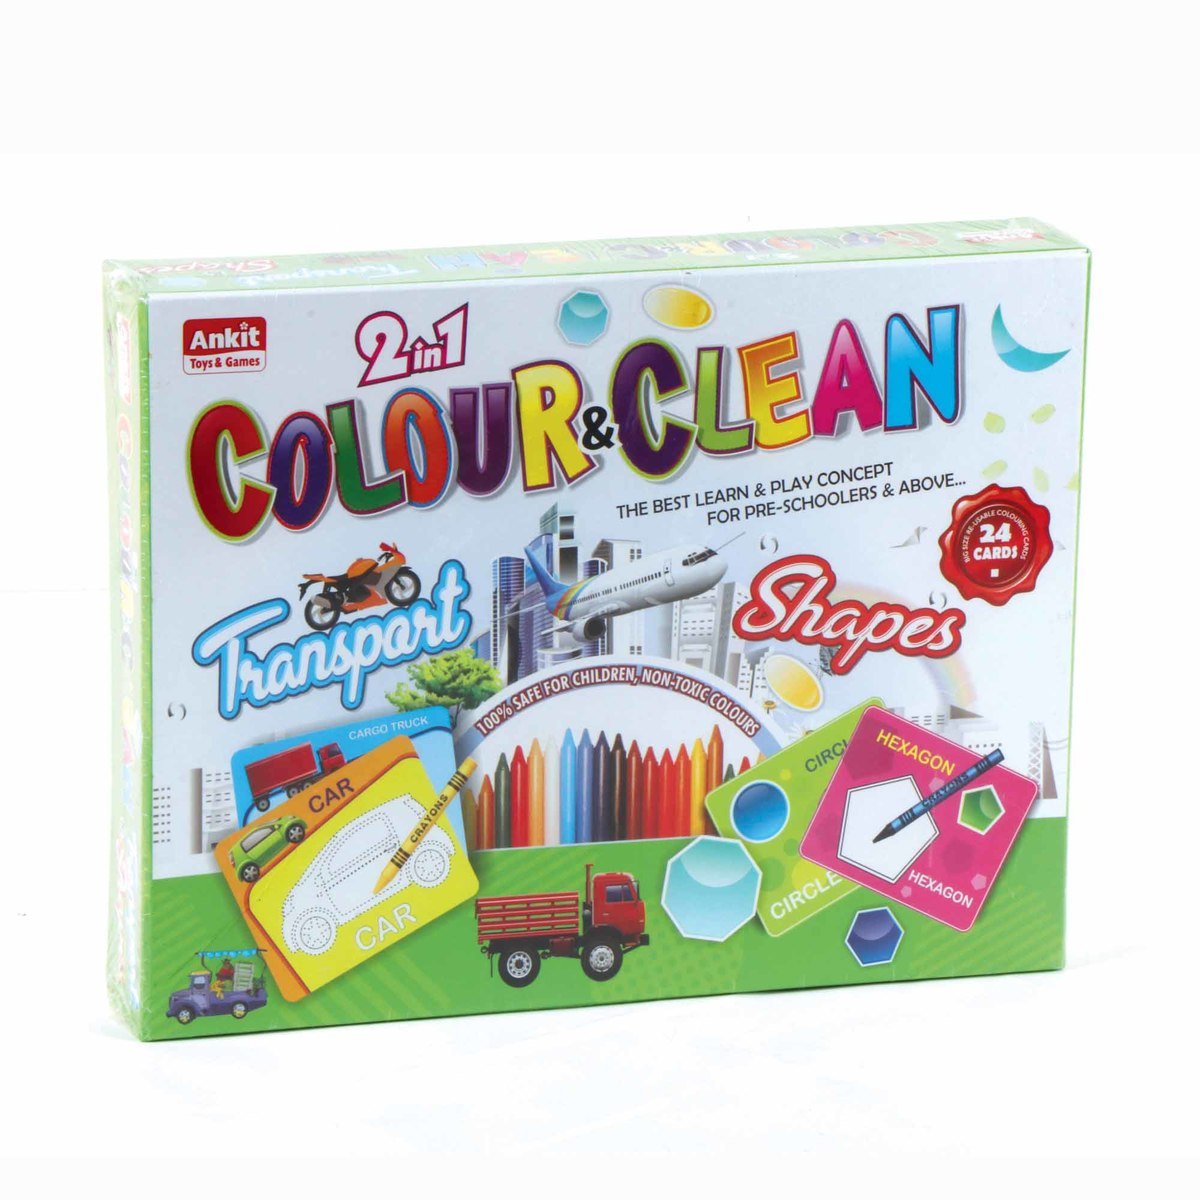 Ankit 2in1 Colour & Clean  Transport  & Shapes Learn & Play Concept for Pre-School & Above